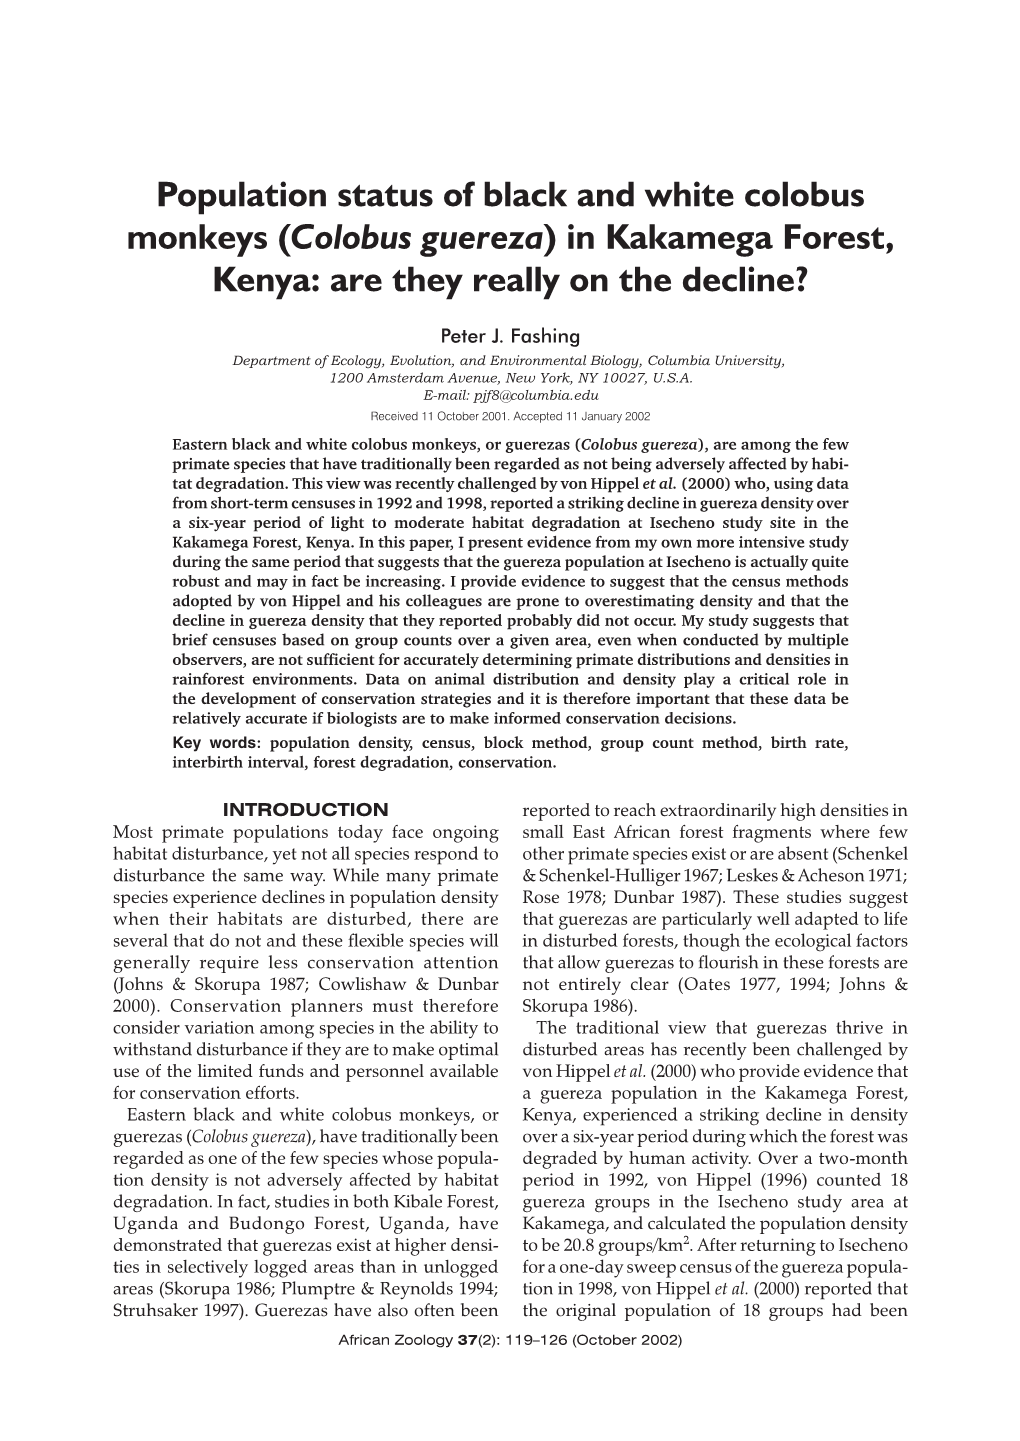 Population Status of Black and White Colobus Monkeys (Colobus Guereza) in Kakamega Forest, Kenya: Are They Really on the Decline?